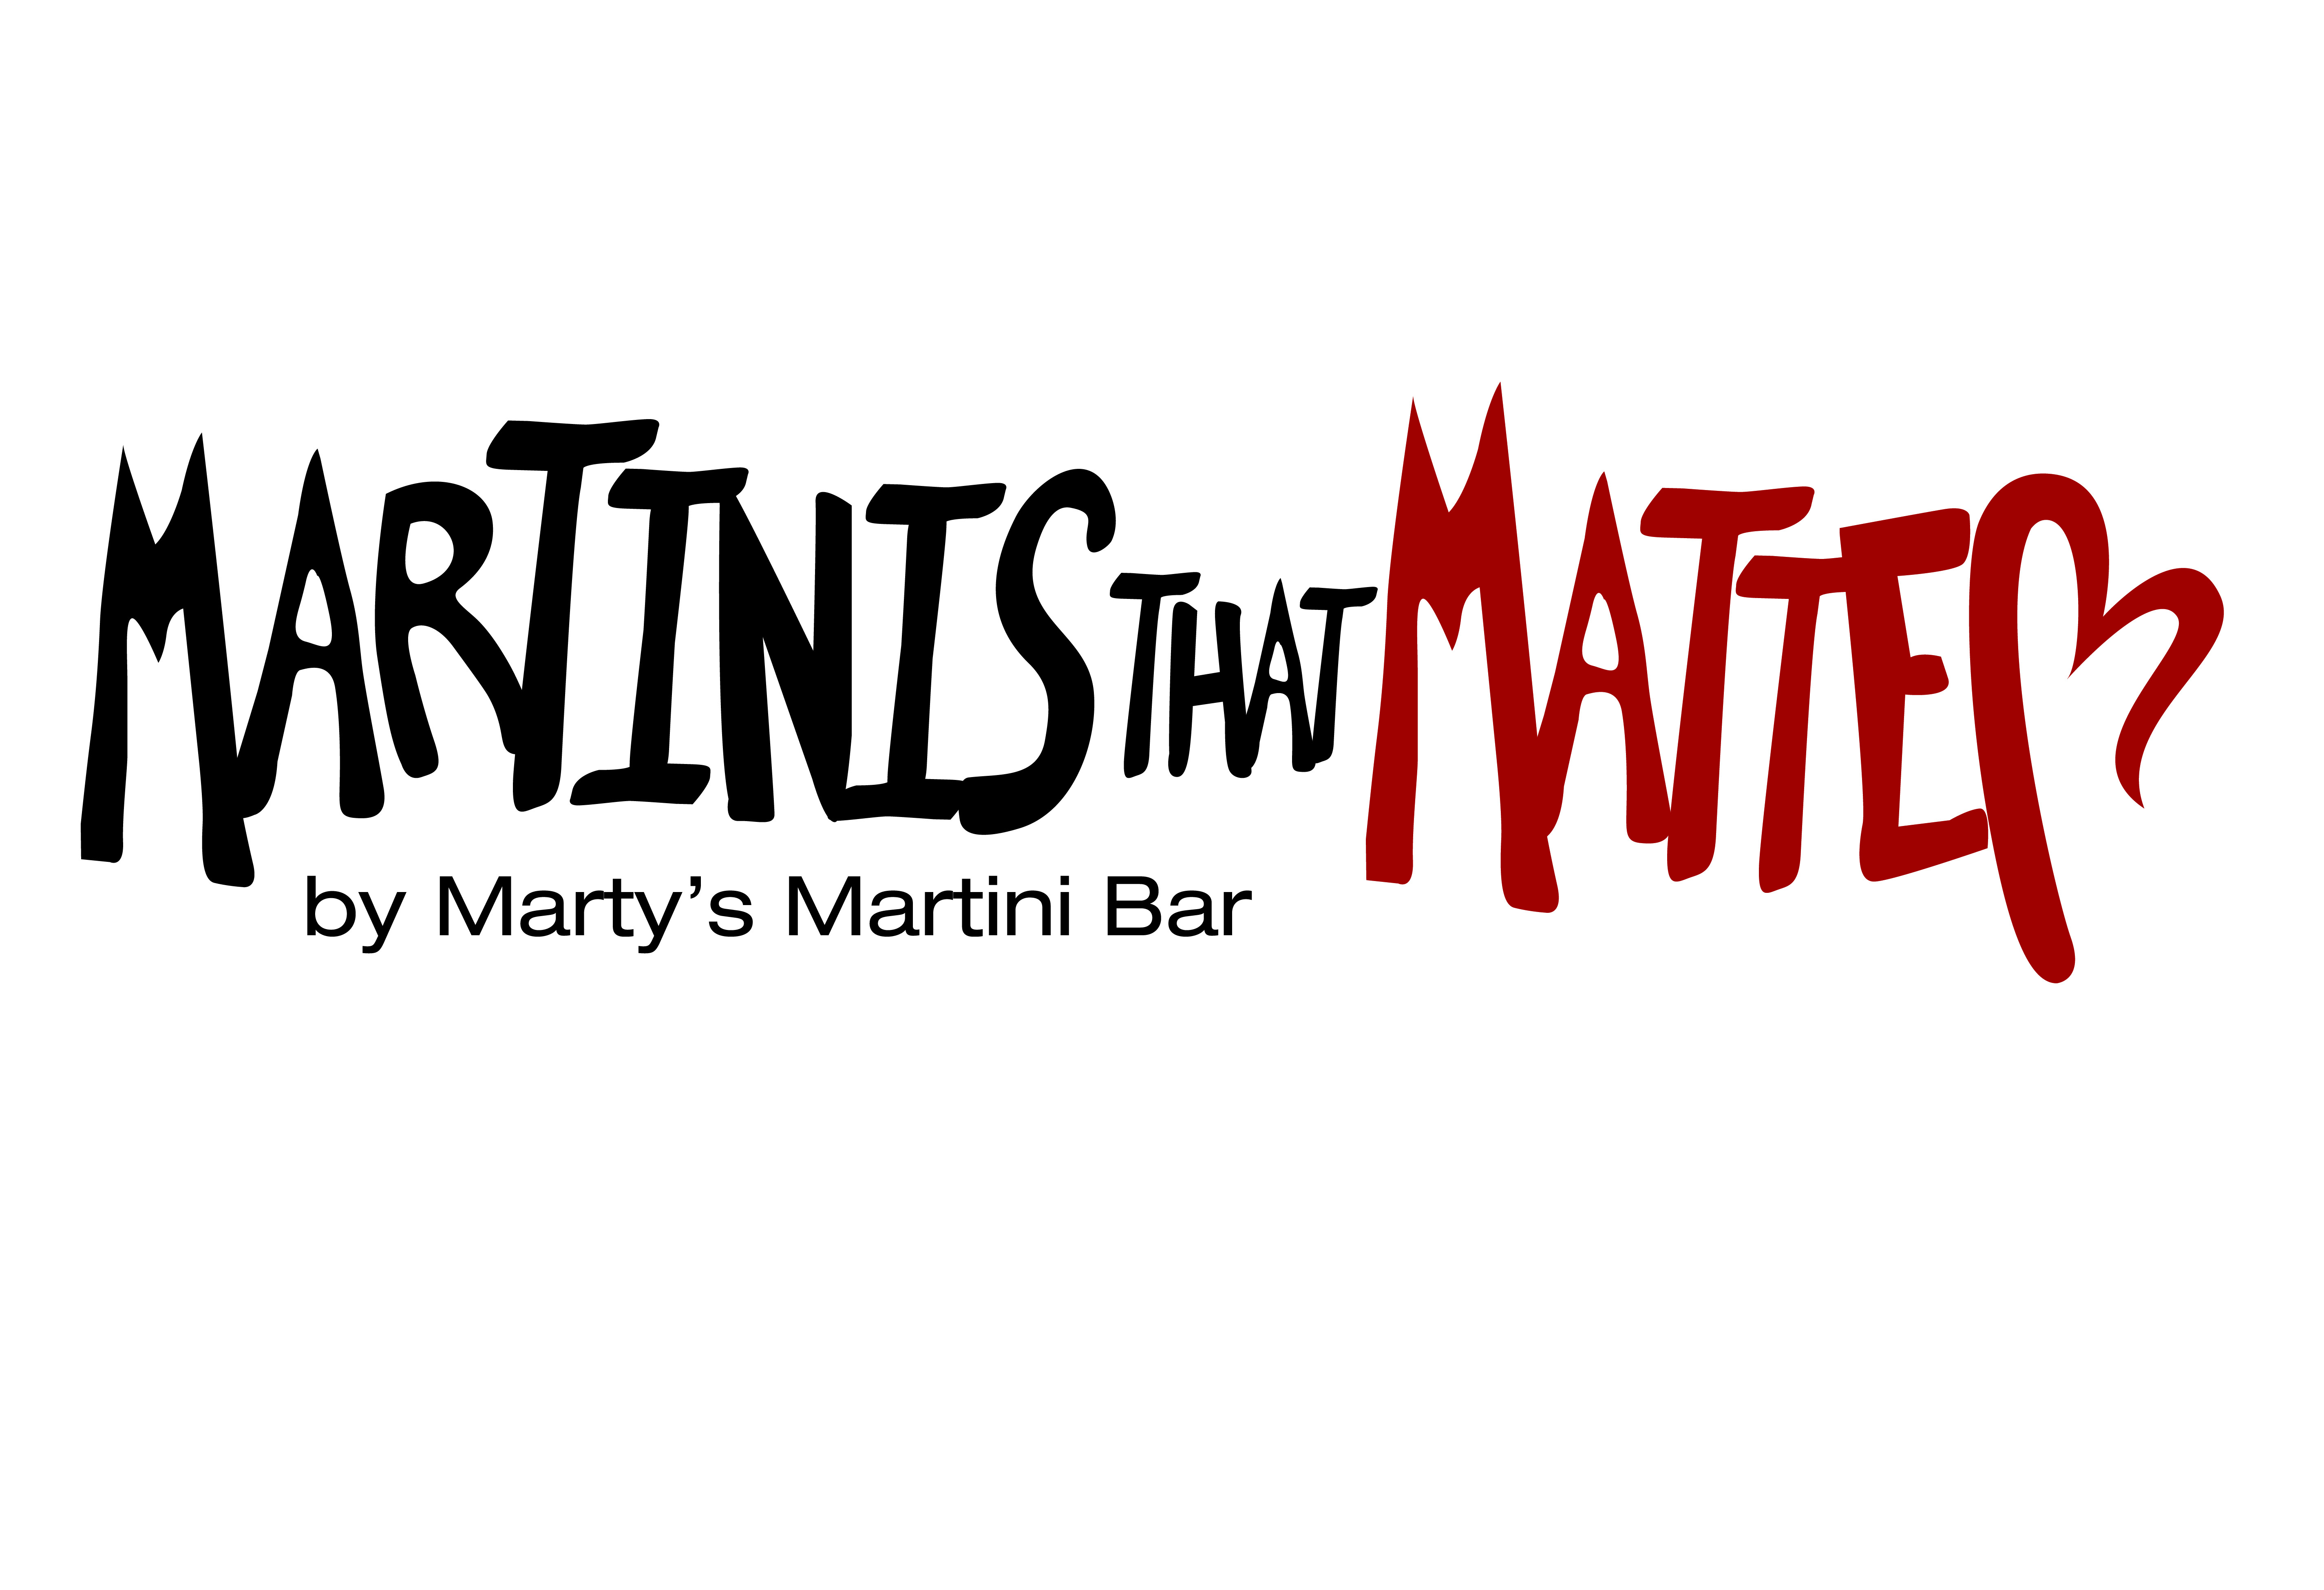 Join us for a drink at Marty’s Martini Bar (1511 W Balmoral Ave) on Sunday, July 10, from 2-5 p.m. for a Martini’s that Matter fundraiser. Profits will go to The Boulevard.